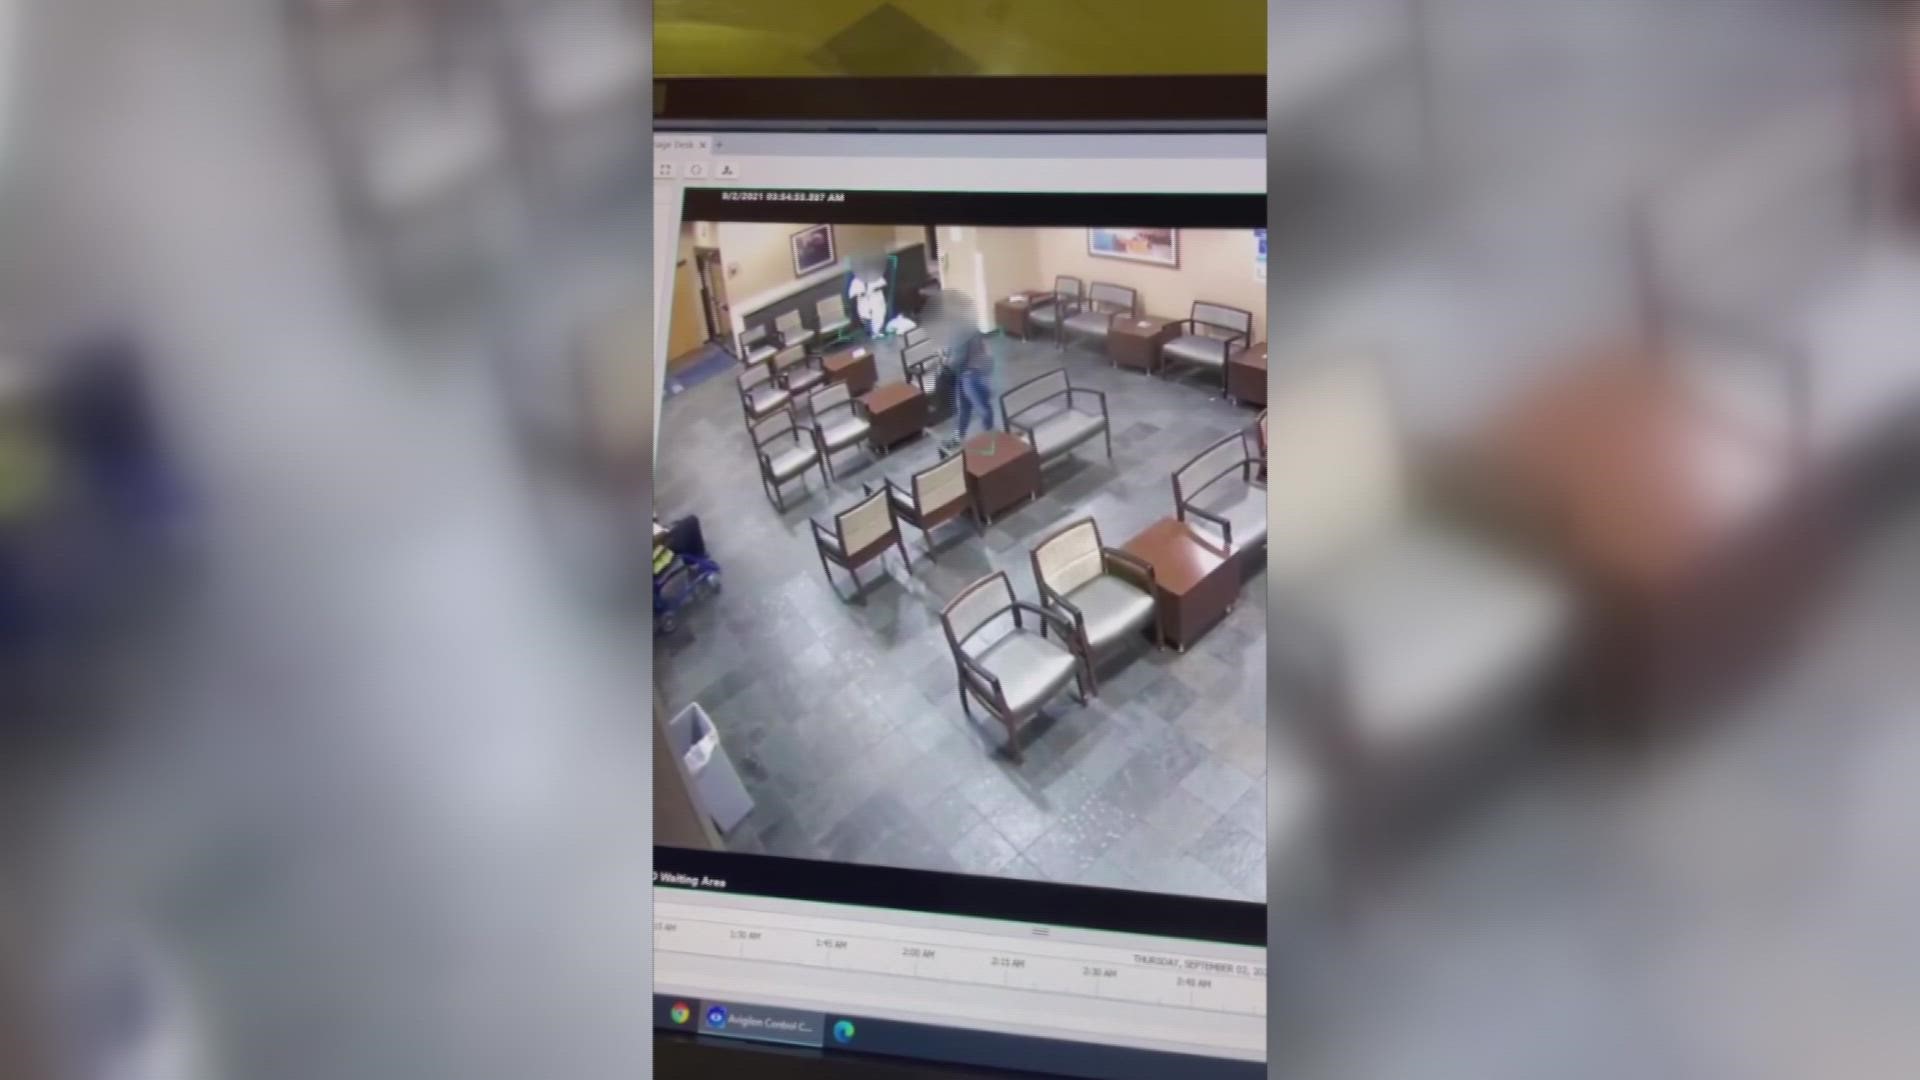 We obtained surveillance video from SSM Health staff that shows what staff deal with. A man comes into the emergency room, tries to punch staff, and throws a chair.